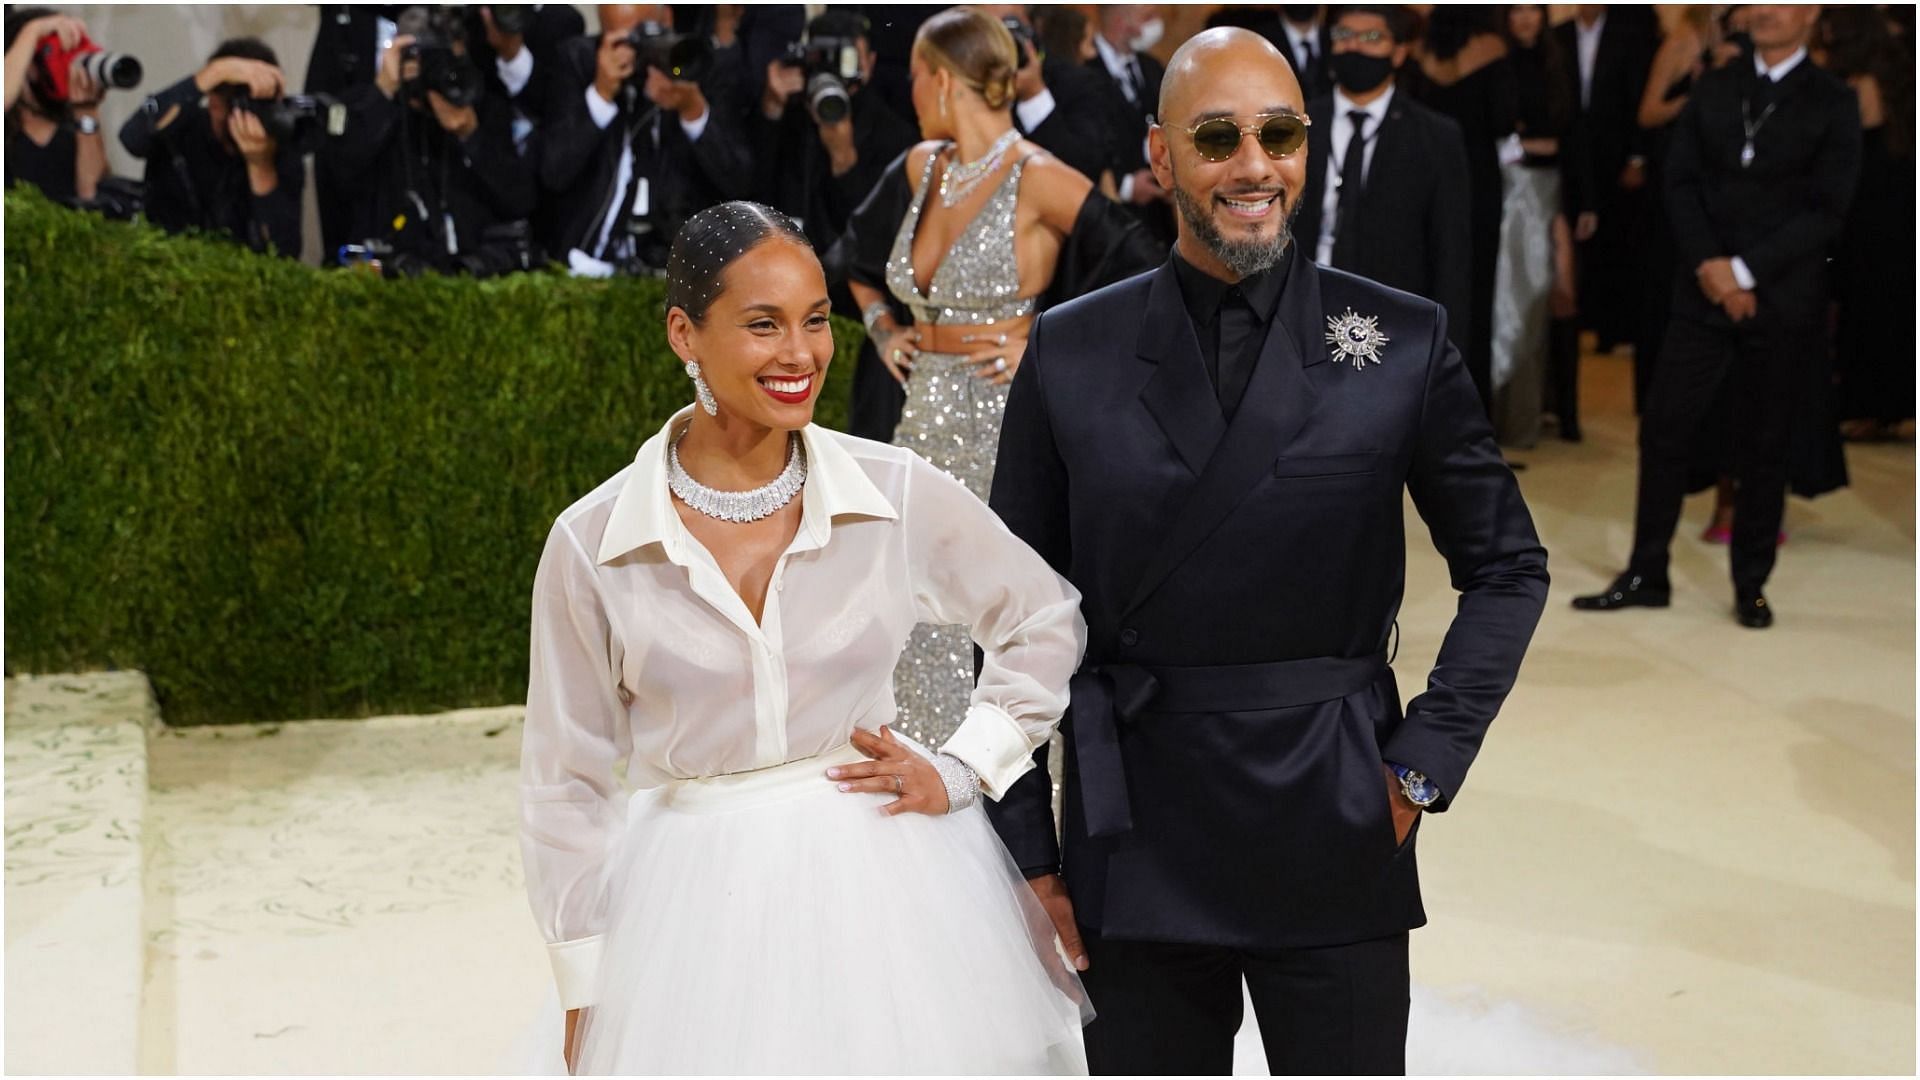 Alicia Keys and Swizz Beatz attend 2021 Costume Institute Benefit - In America: A Lexicon of Fashion at the Metropolitan Museum of Art on September 13, 2021, in New York City (Image via Getty Images)